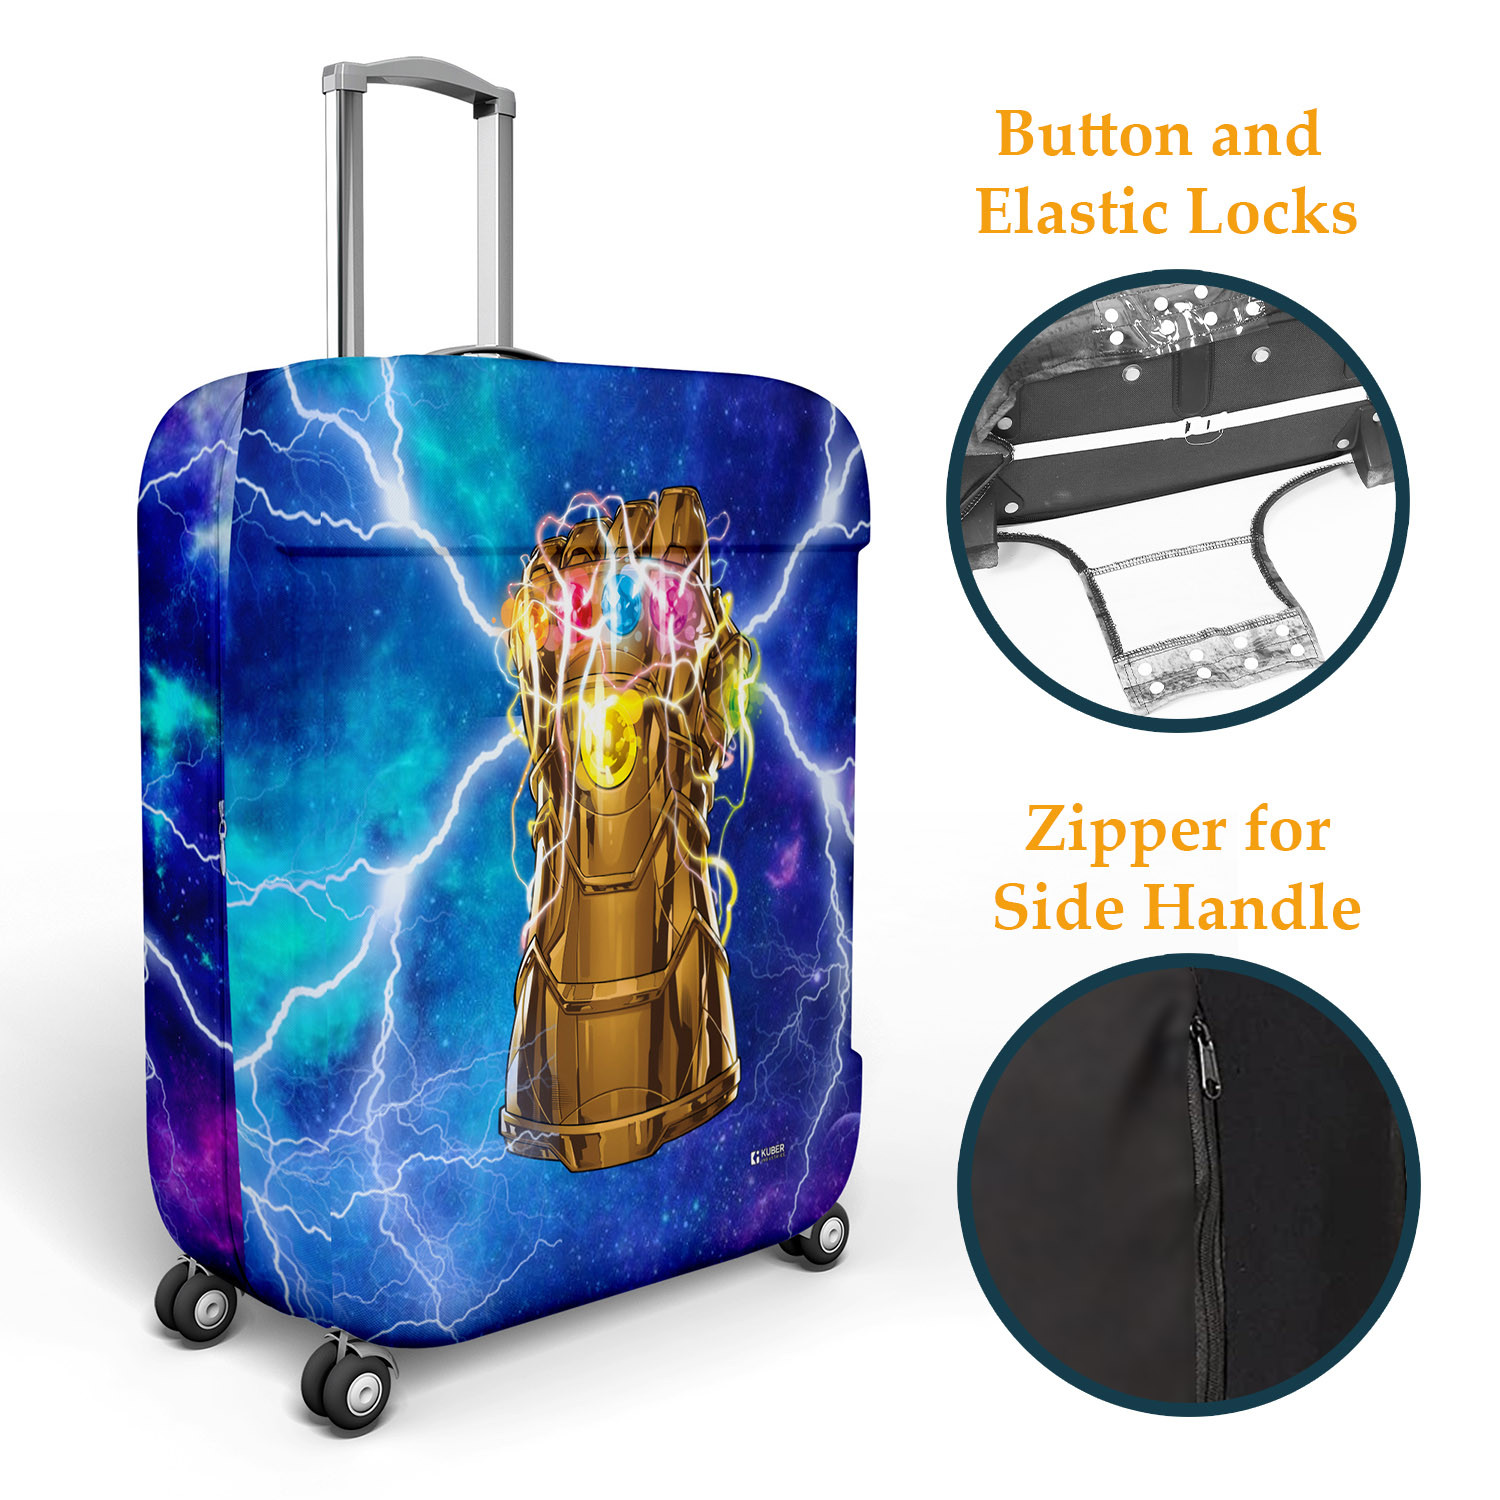 Kuber Industries Marvel The Infinity Gauntlet Luggage Cover | Polyester Travel Suitcase Cover | Washable | Stretchable Suitcase Cover | 18-22 Inch-Small | 22-26 Inch-Medium | Pack of 2 | Sky Blue